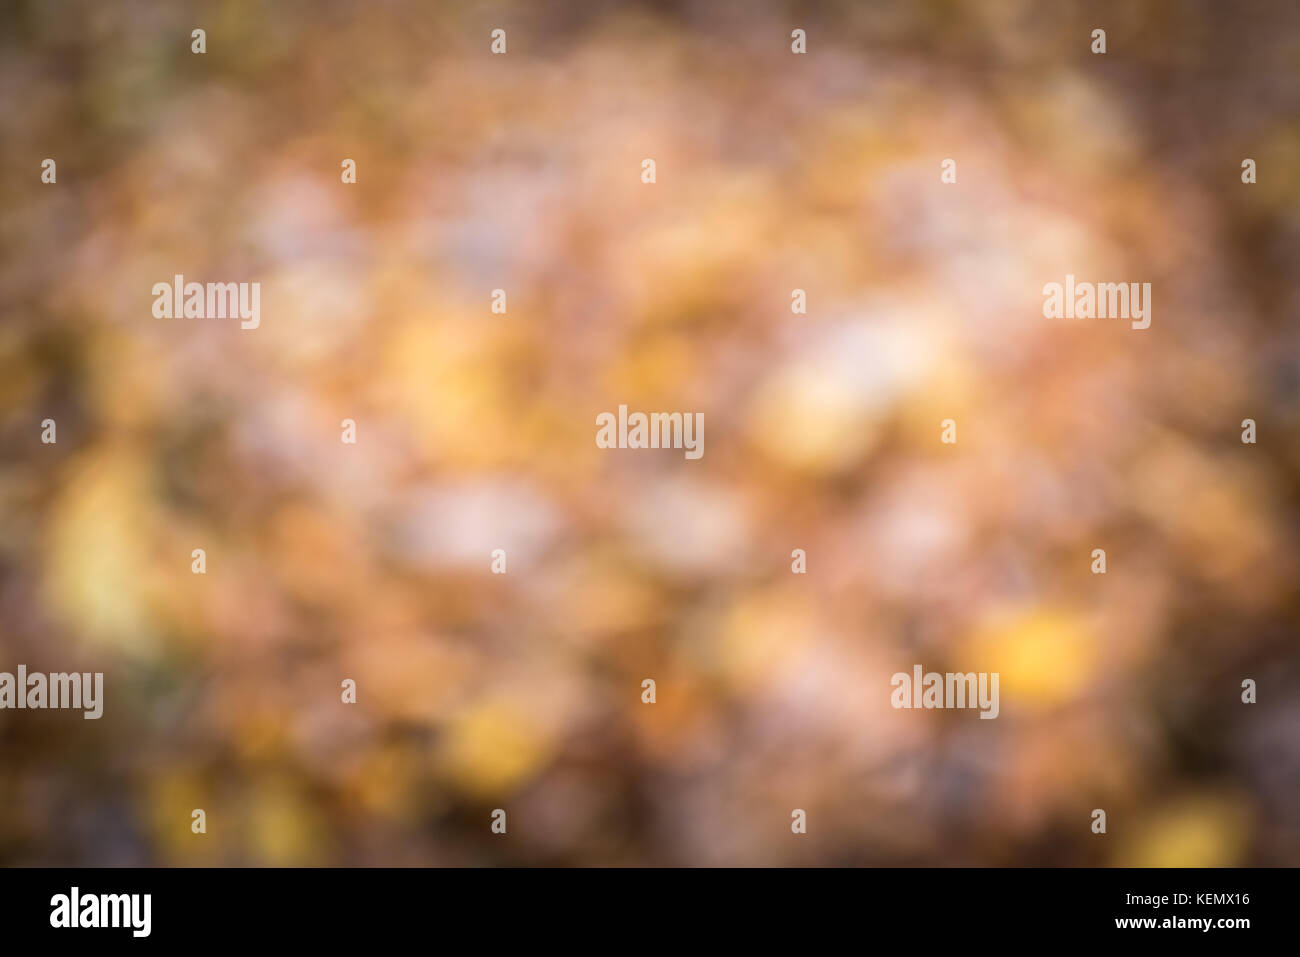 Abstract blurred autumn background, color, vignette effect Stock Photo